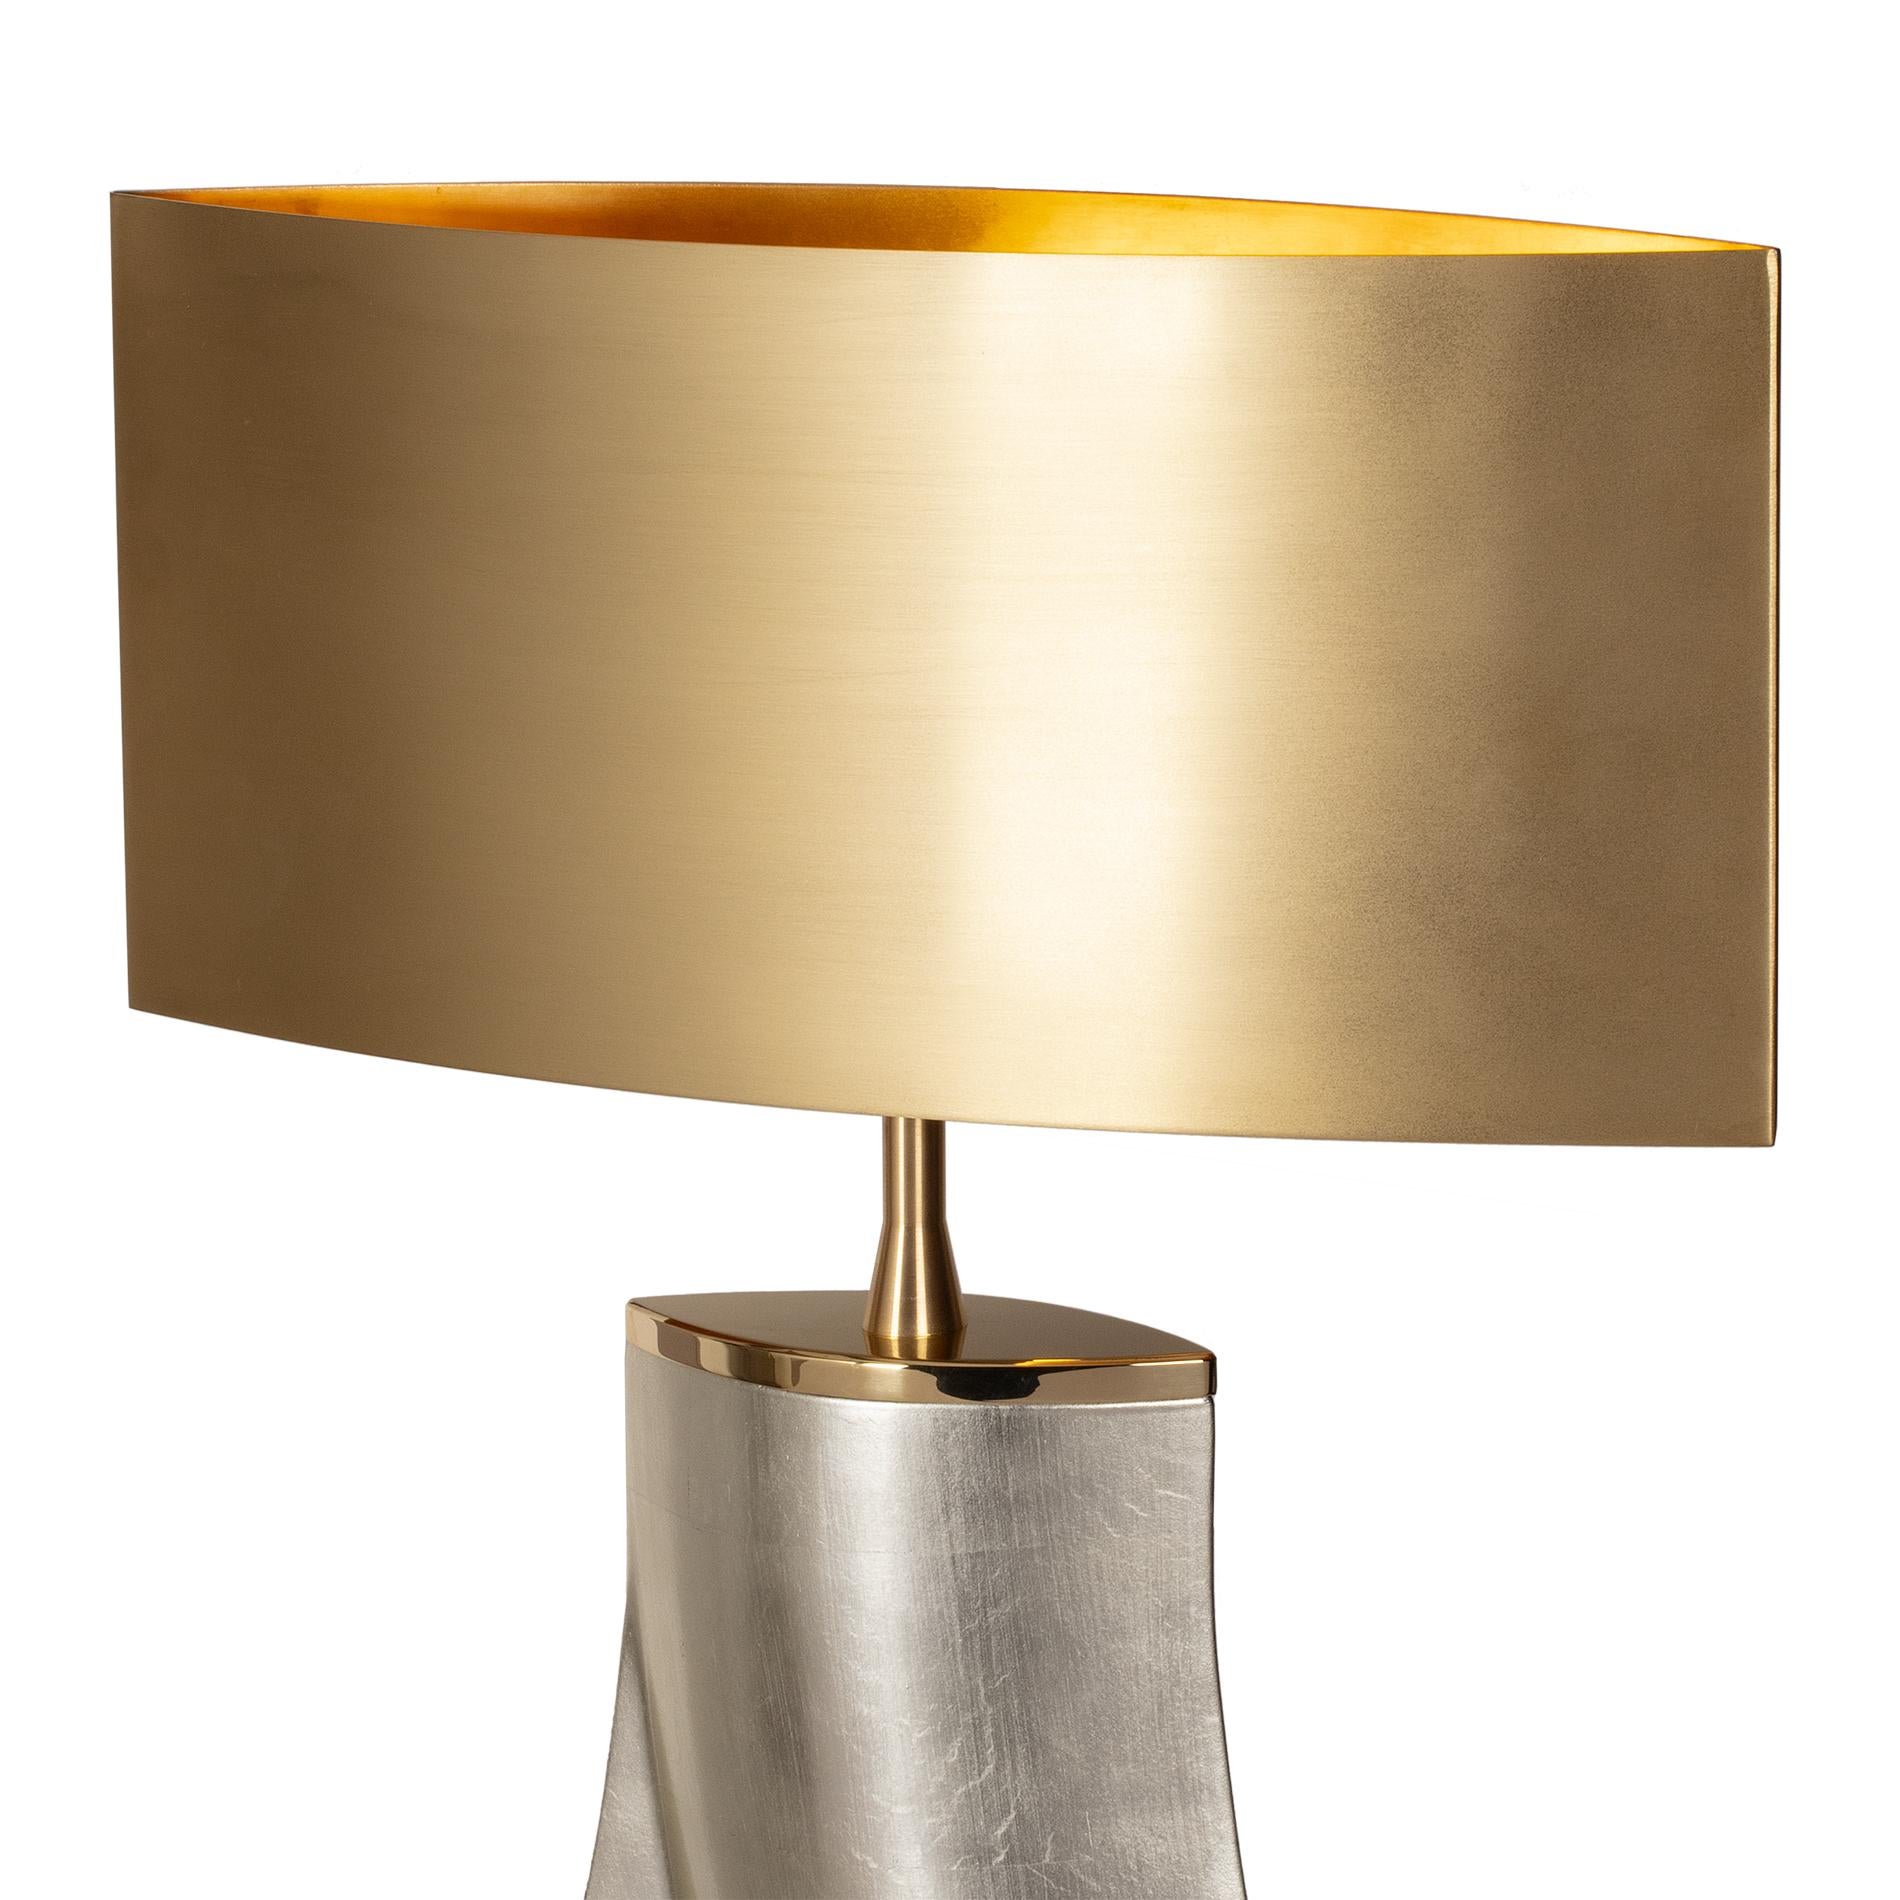 Table lamp one step with casted aluminum structure with
white gold leaf finish. With solid polished brass base and with
solid brushed brass shade. With 1 bulb, lamp holder type E27,
max 60 watt. Bulb not included.